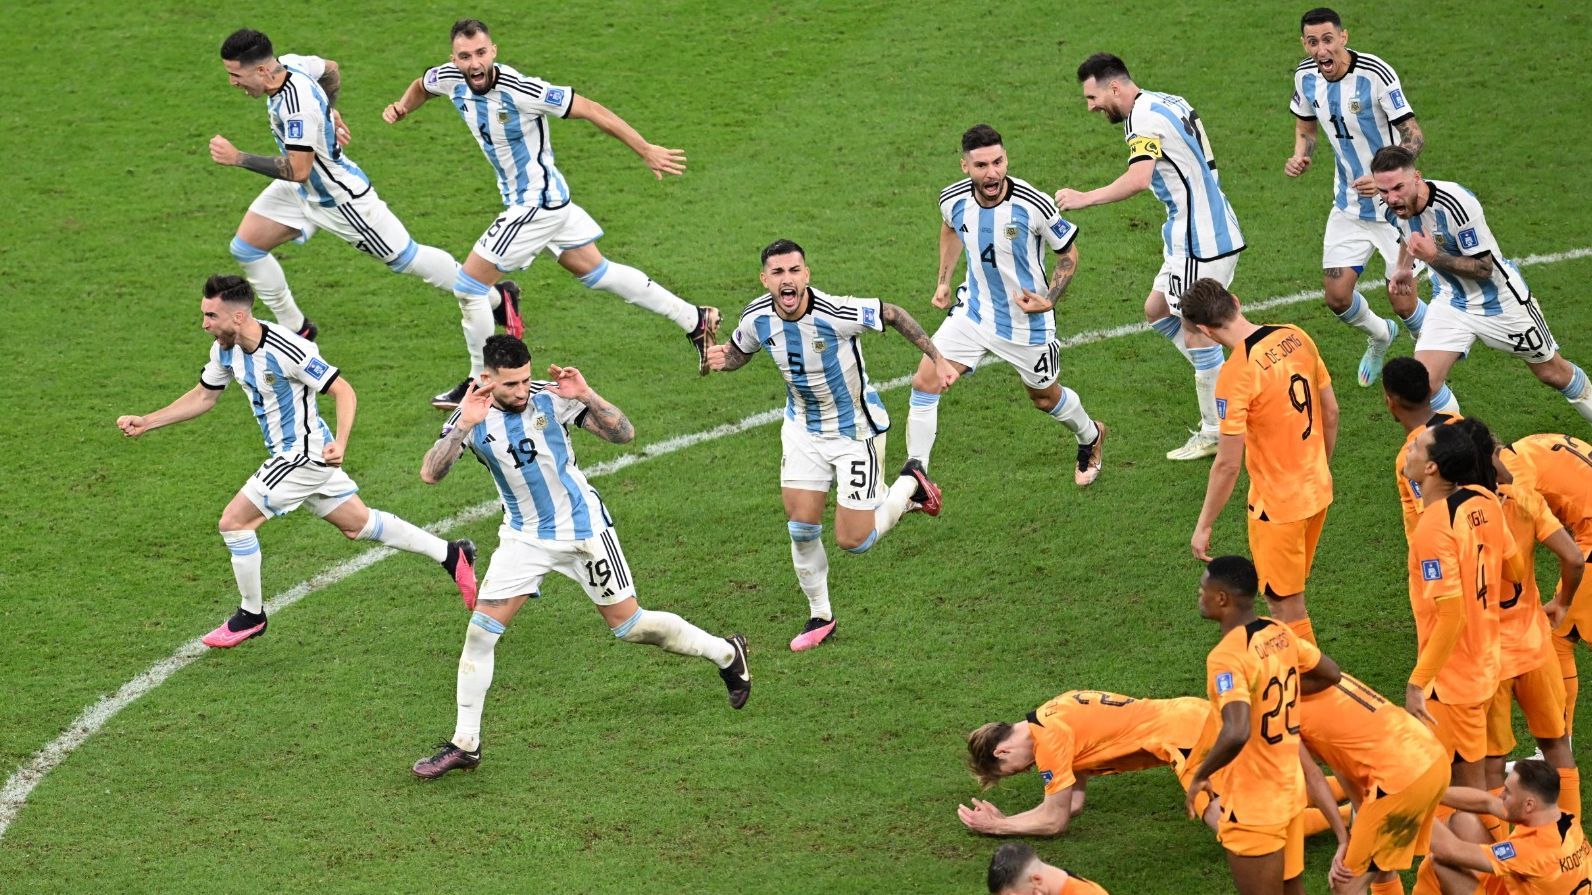 The story behind the photograph of the controversial celebration of Argentina in opposition to the Netherlands within the World Cup